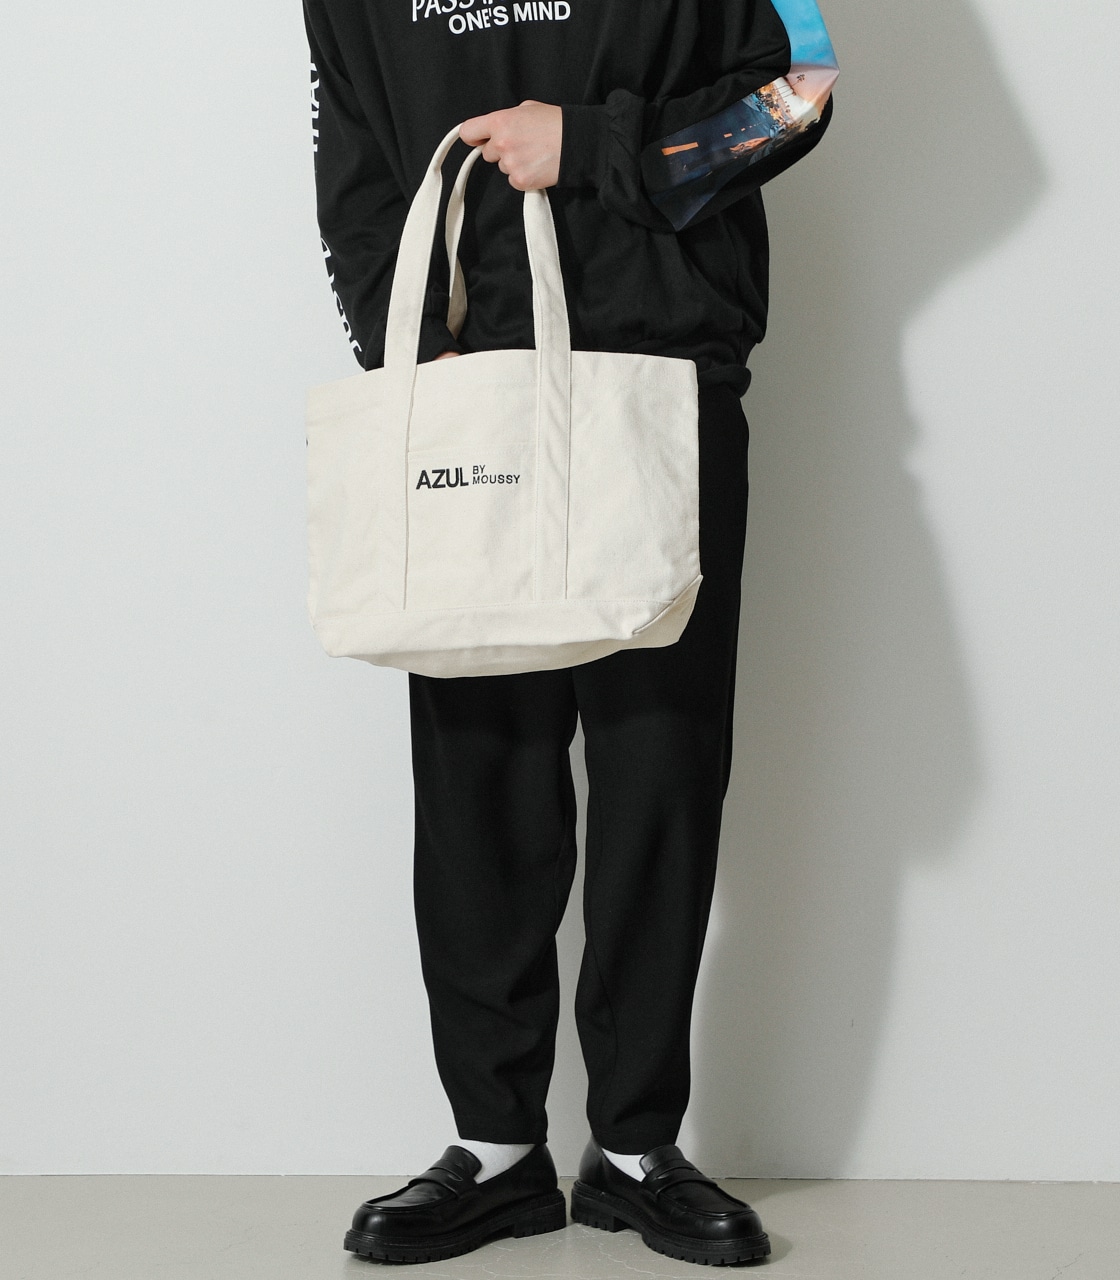 AZUL CANVAS BIG TOTE BAG/AZULキャンバスビッグトートバッグ 詳細画像 O/WHT 1